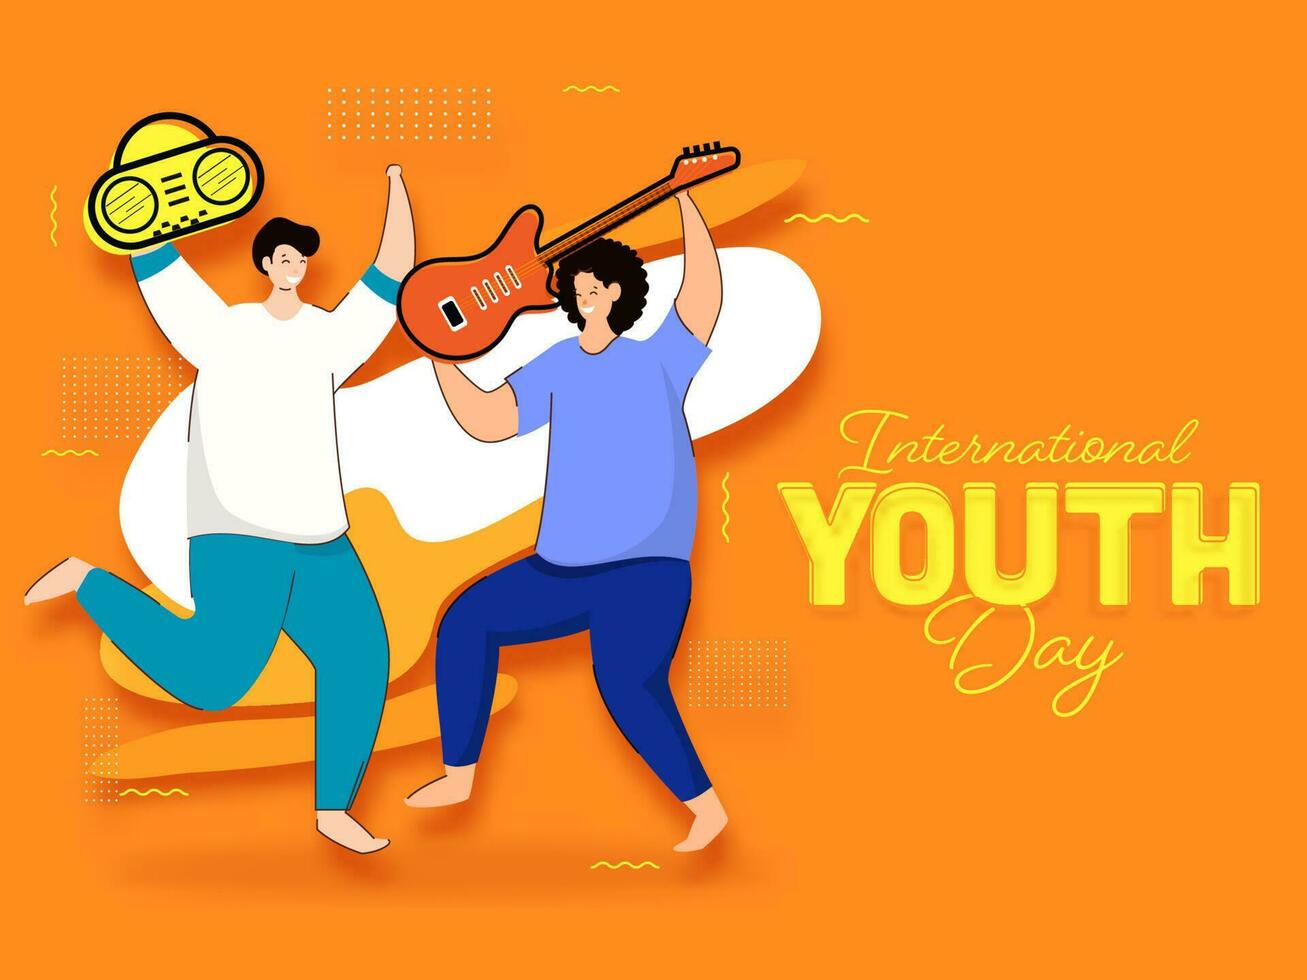 Cartoon Character of Two Young Boy Holding Guitar and Radio in Dancing Pose on Orange Background for International Youth Day. vector